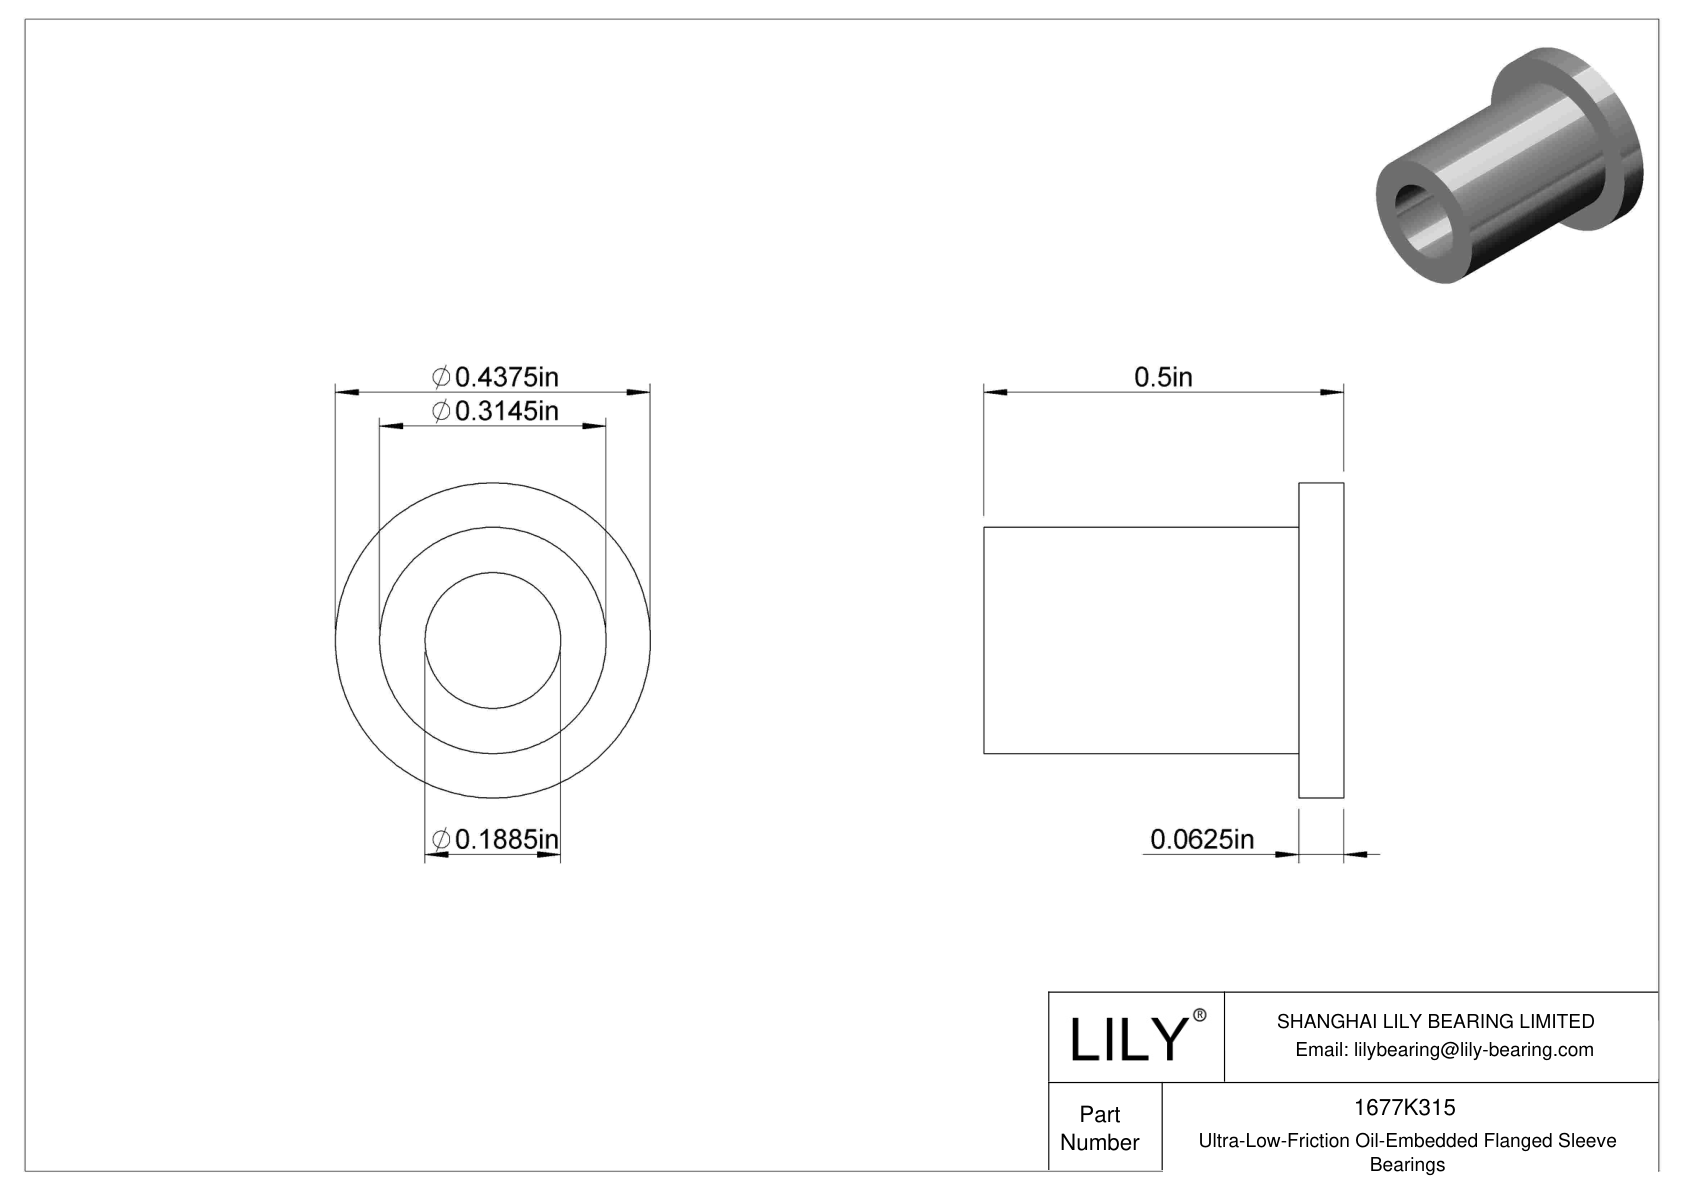 BGHHKDBF Ultra-Low-Friction Oil-Embedded Flanged Sleeve Bearings cad drawing